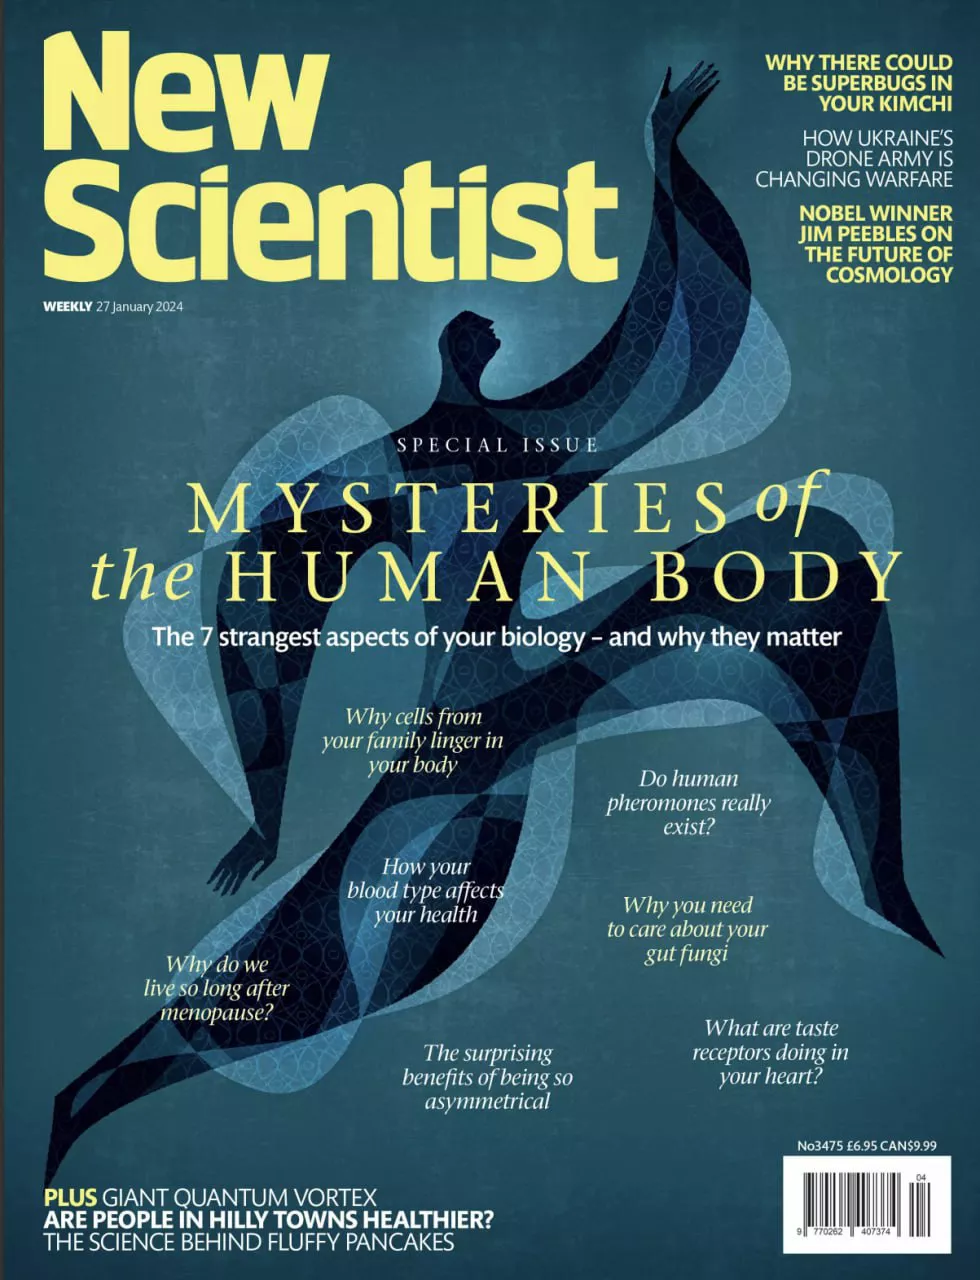 New Scientist - 27 January 2024 (science)